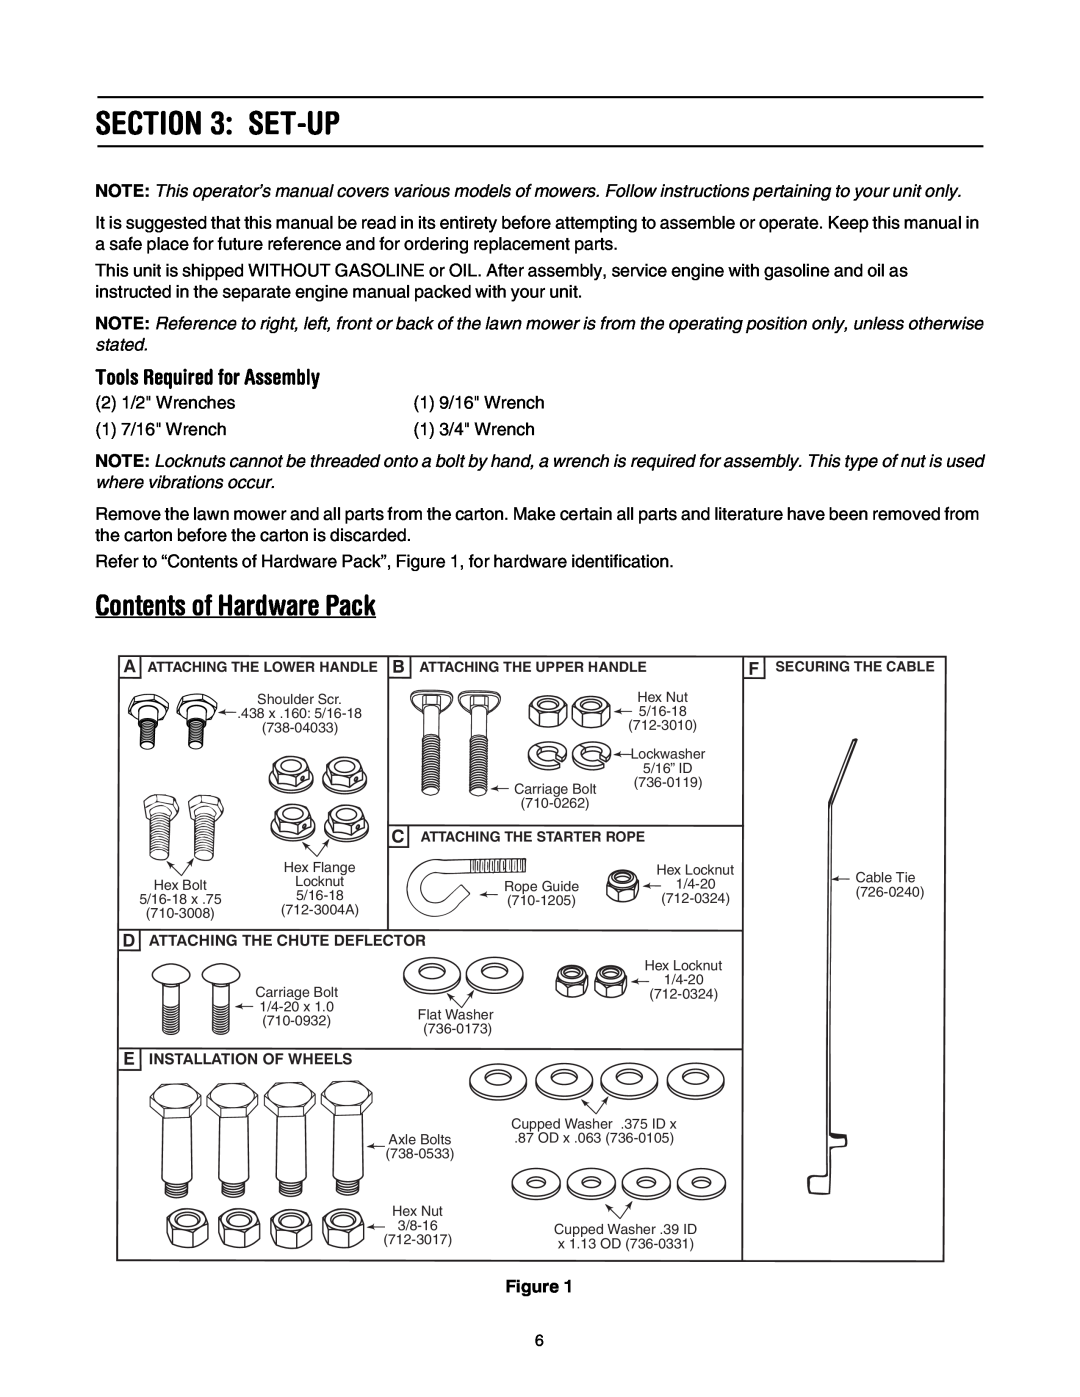 MTD 20 manual Set-Up, Contents of Hardware Pack, Tools Required for Assembly 